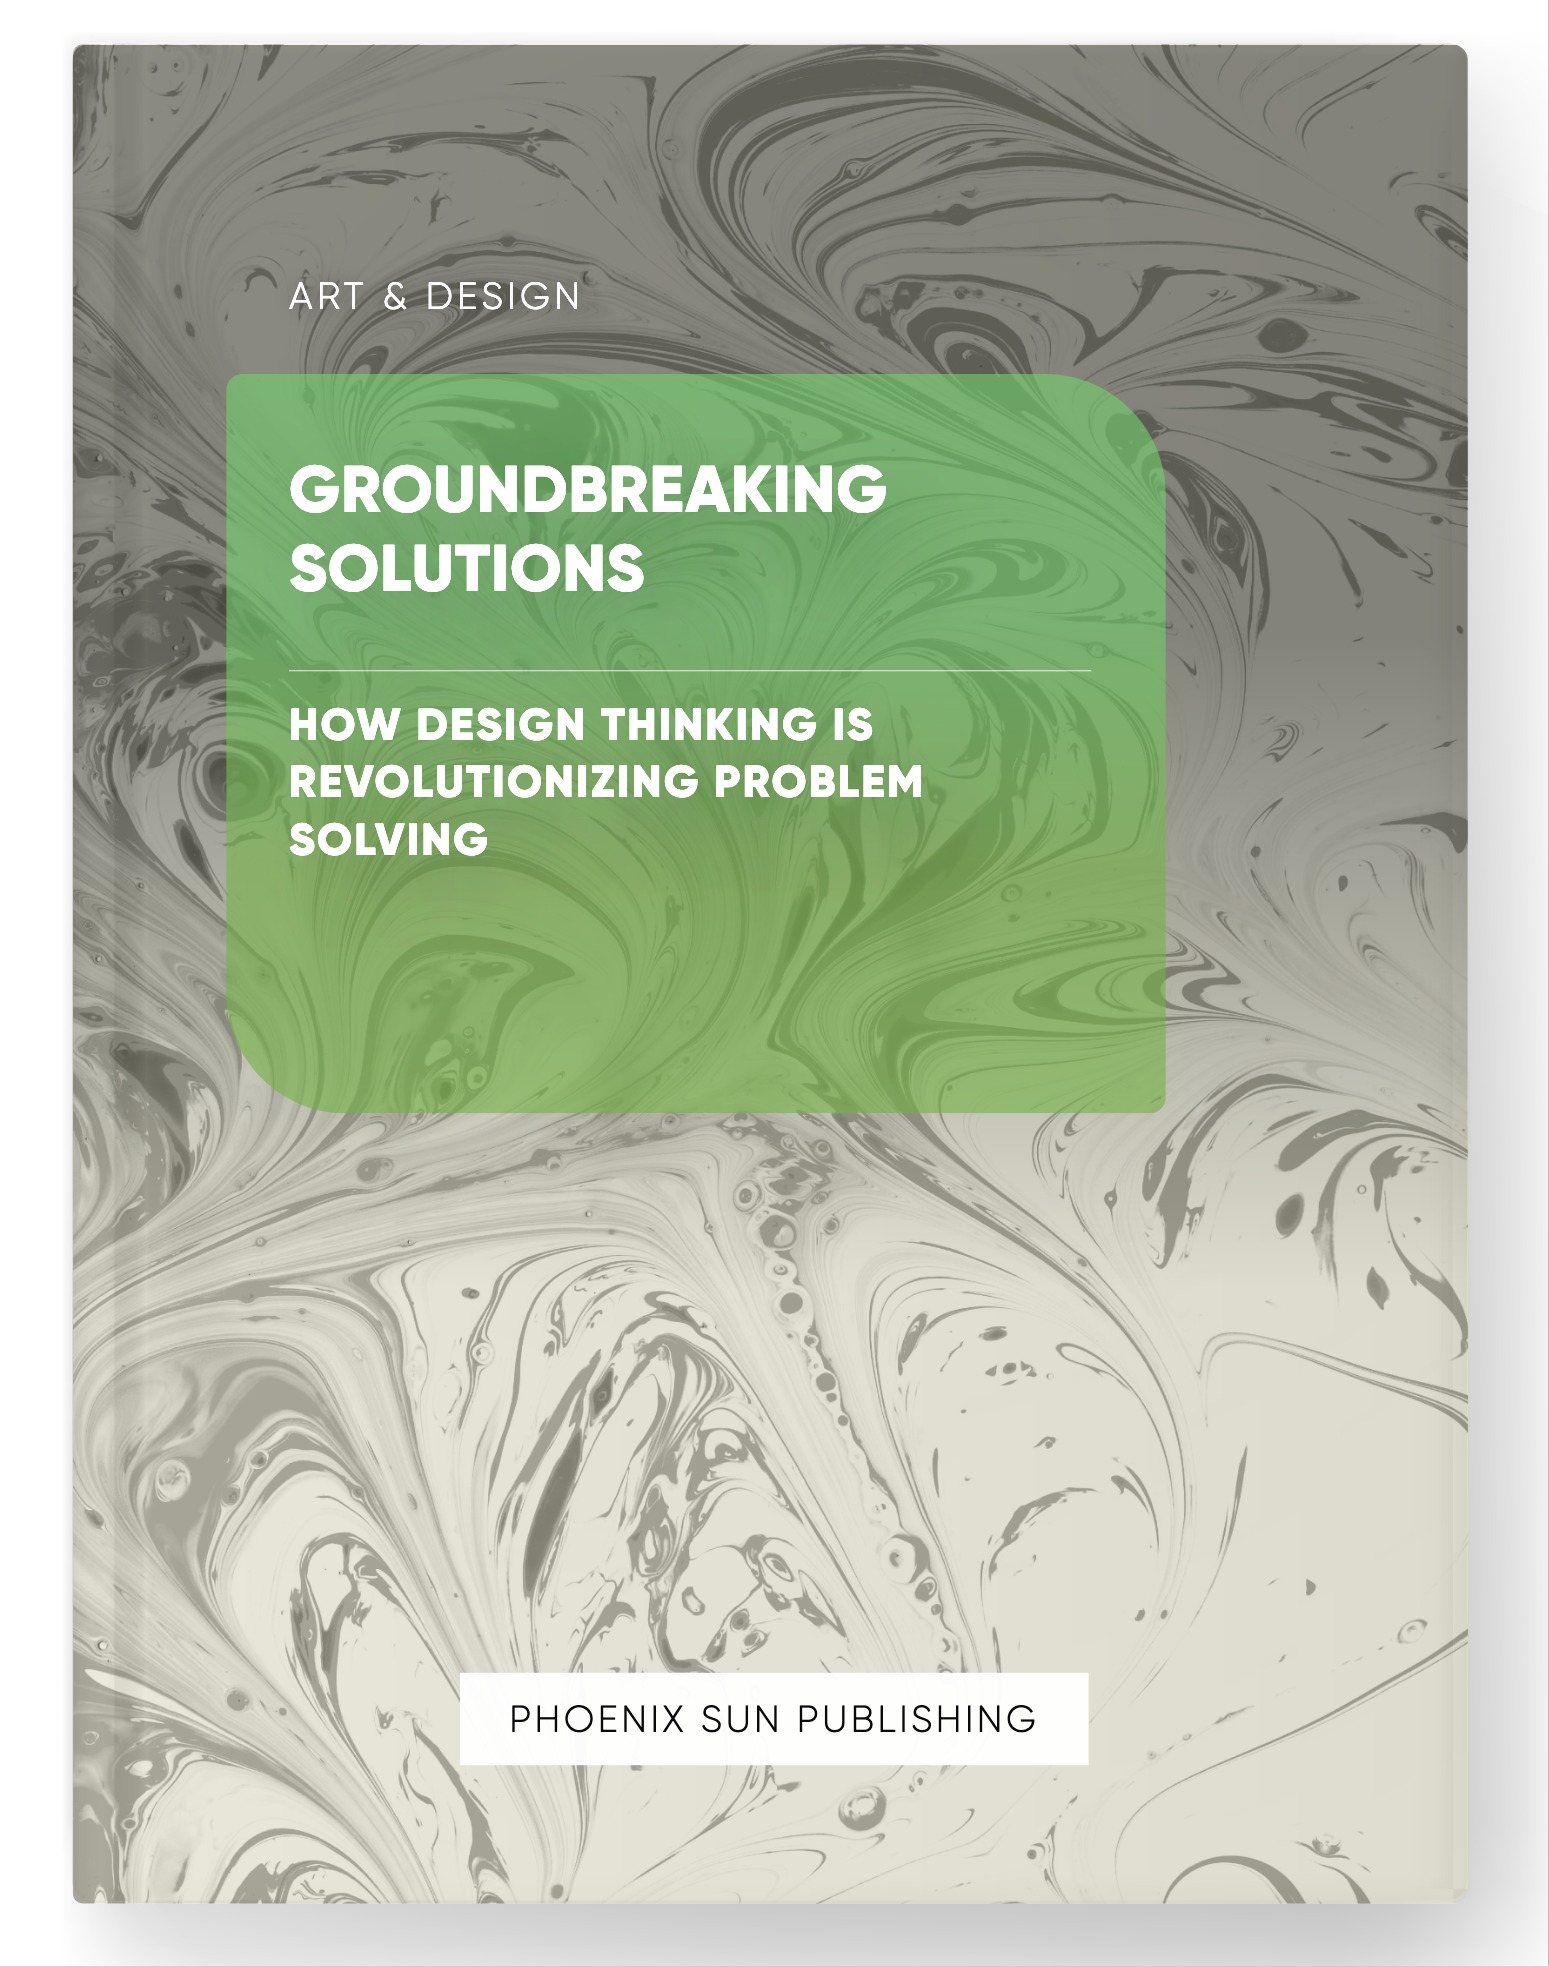 Groundbreaking Solutions – How Design Thinking is Revolutionizing Problem Solving